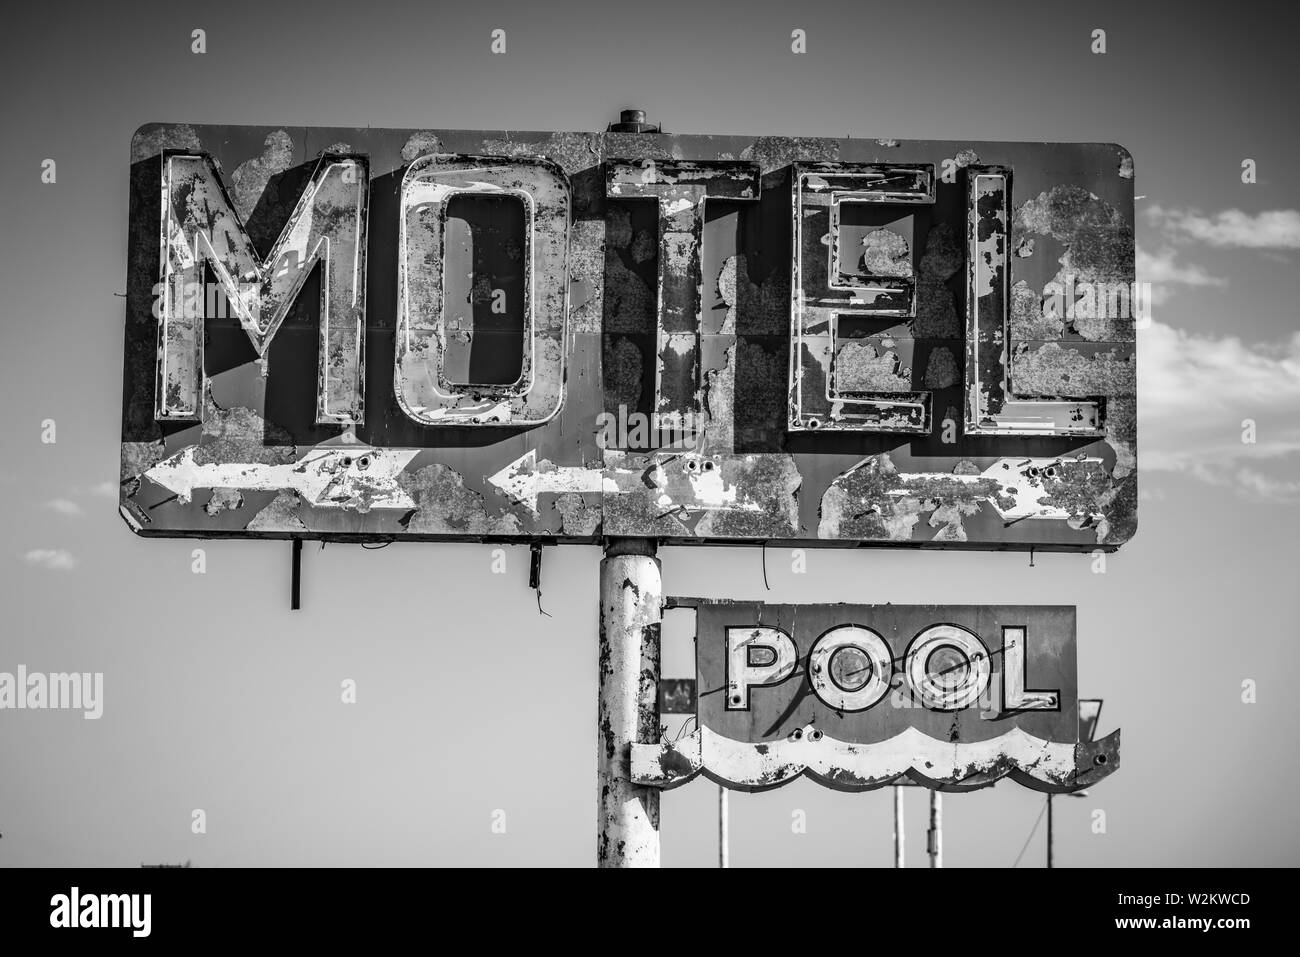 A dilapidated, vintage motel sign in the desert of Arizona Stock Photo